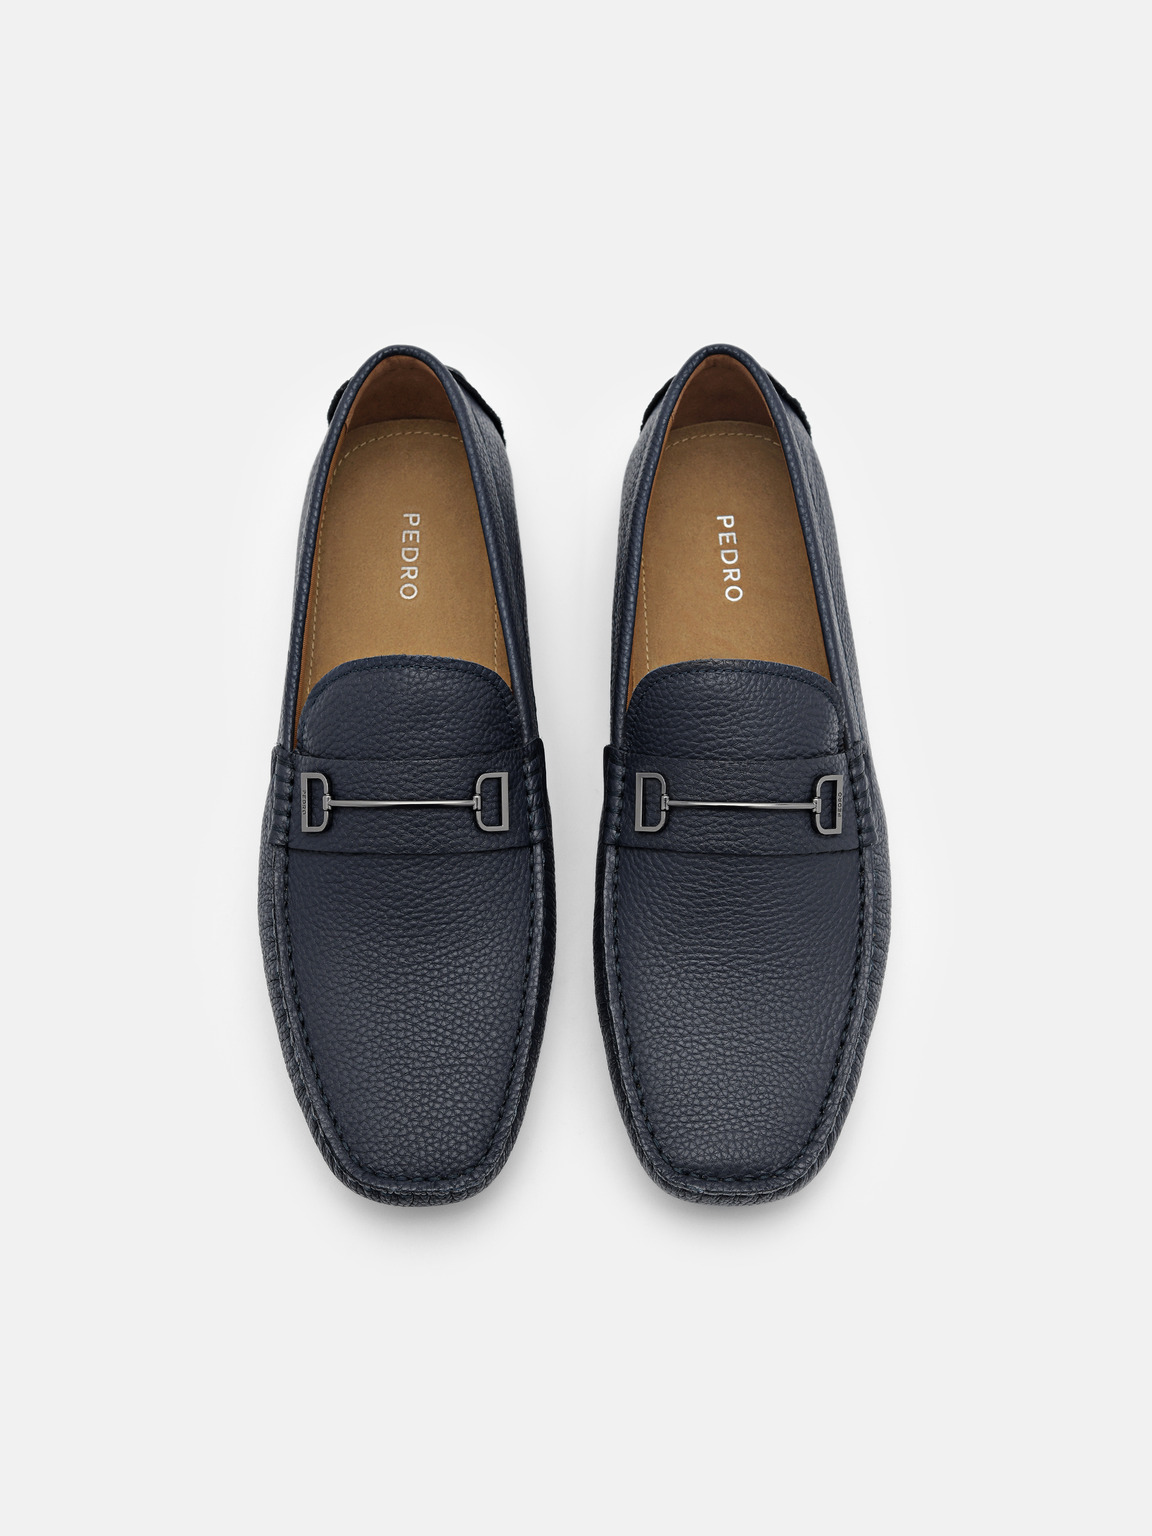 Casey Leather Driving Shoes, Navy